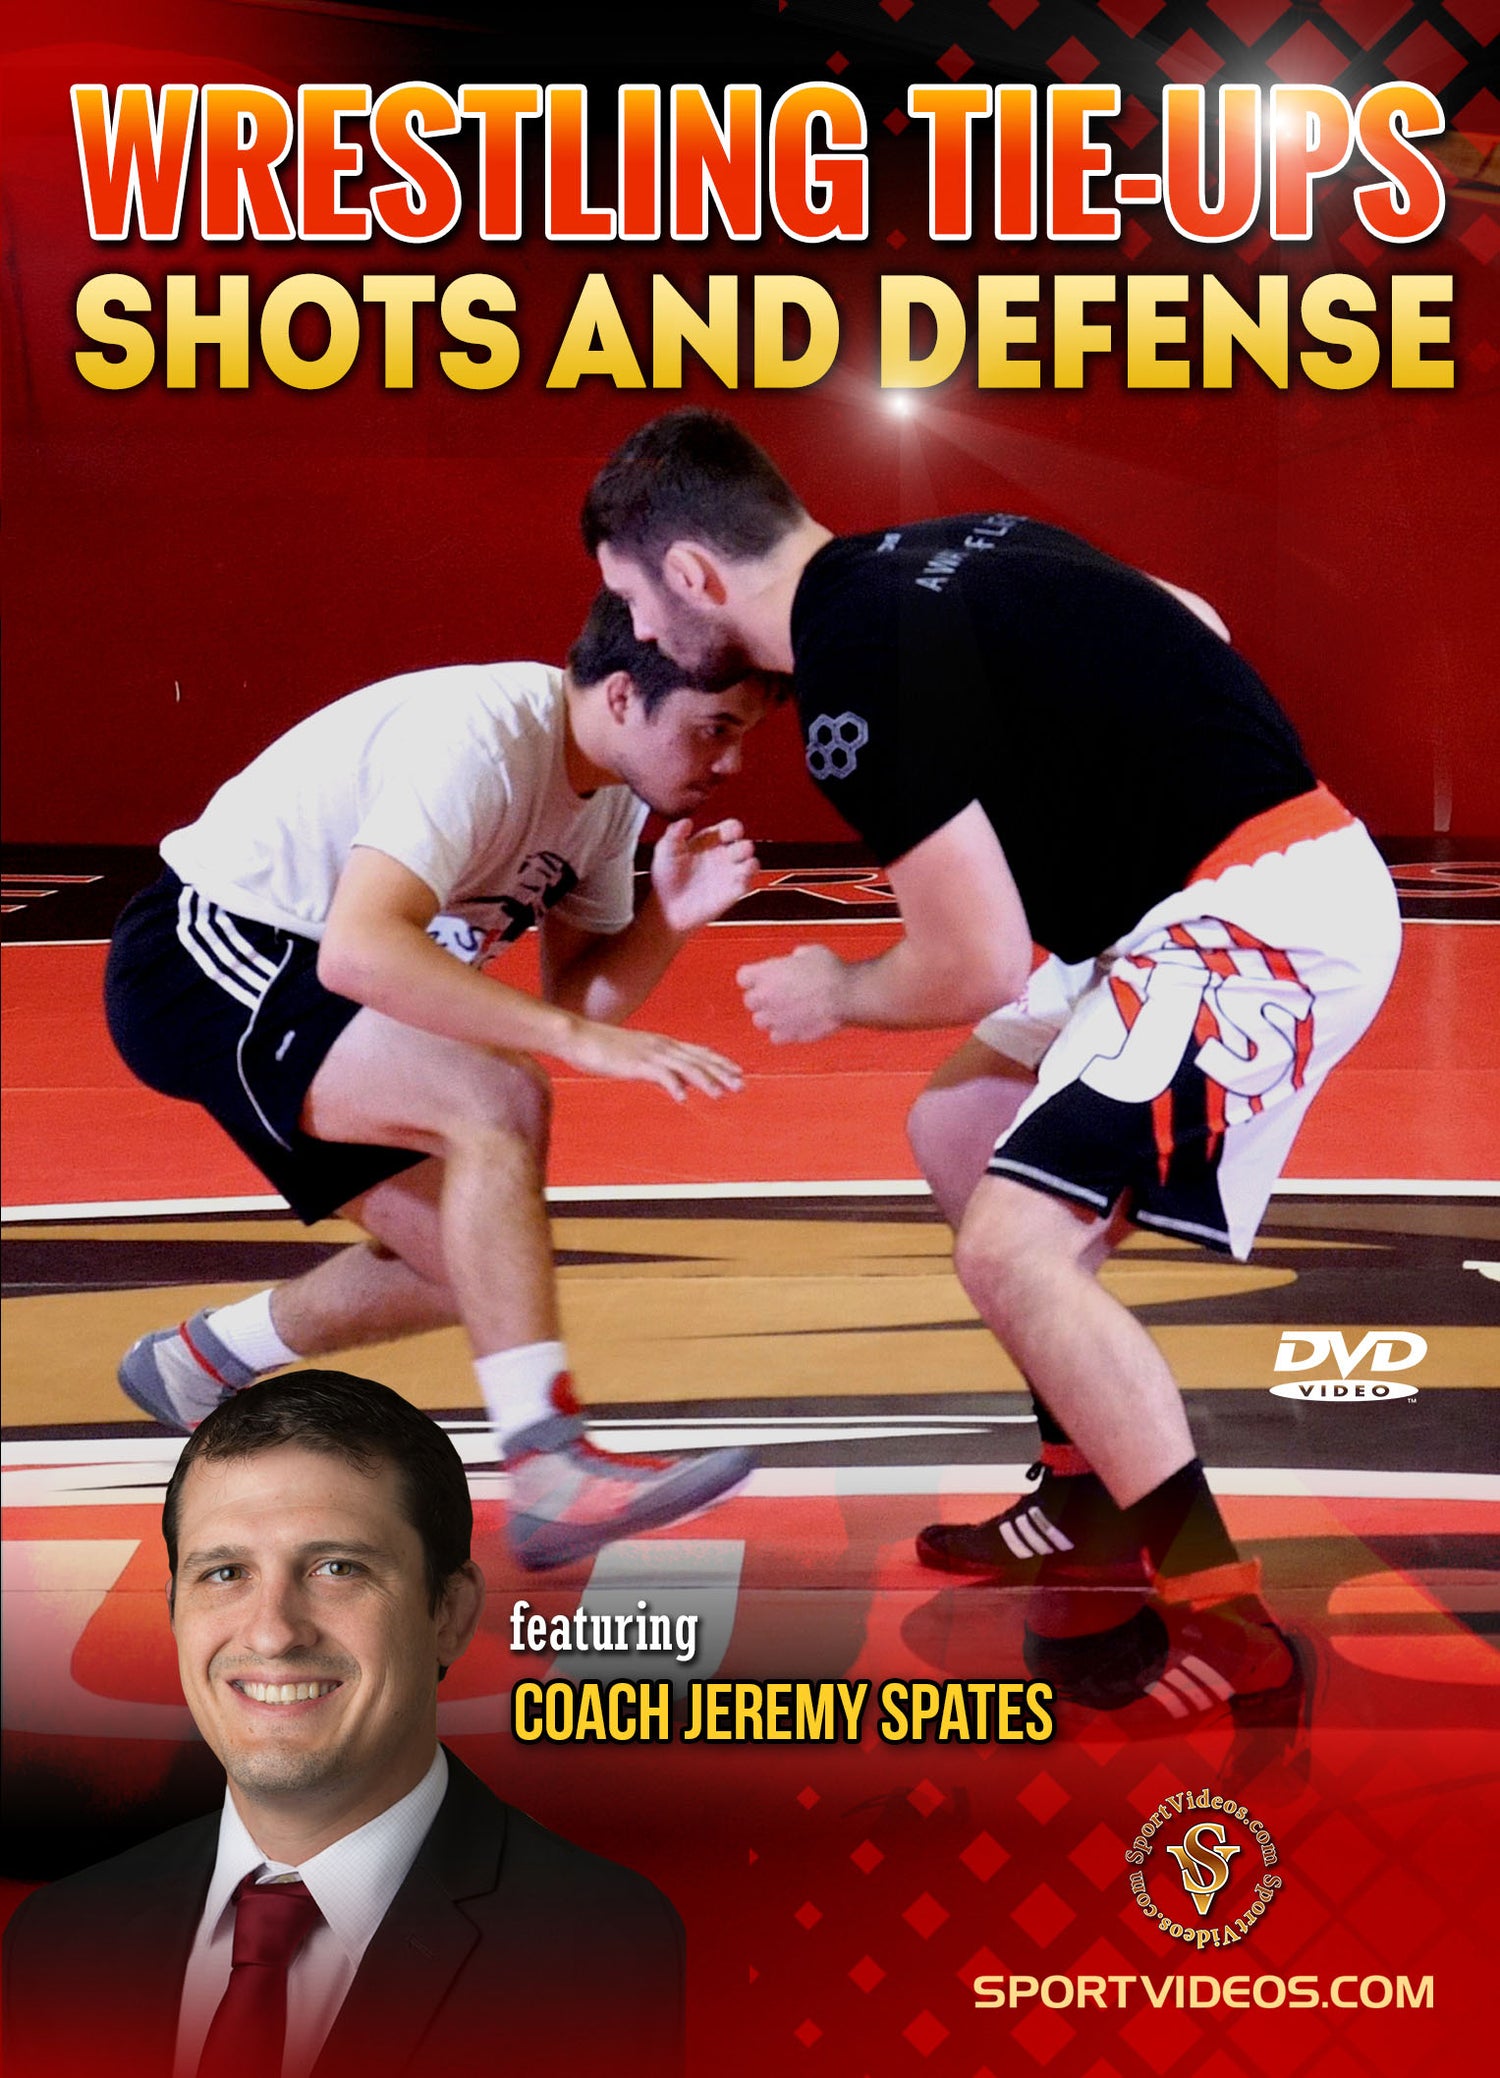 Wrestling Tie-ups, Shots and Defense DVD by Jeremy Spates - Budovideos Inc